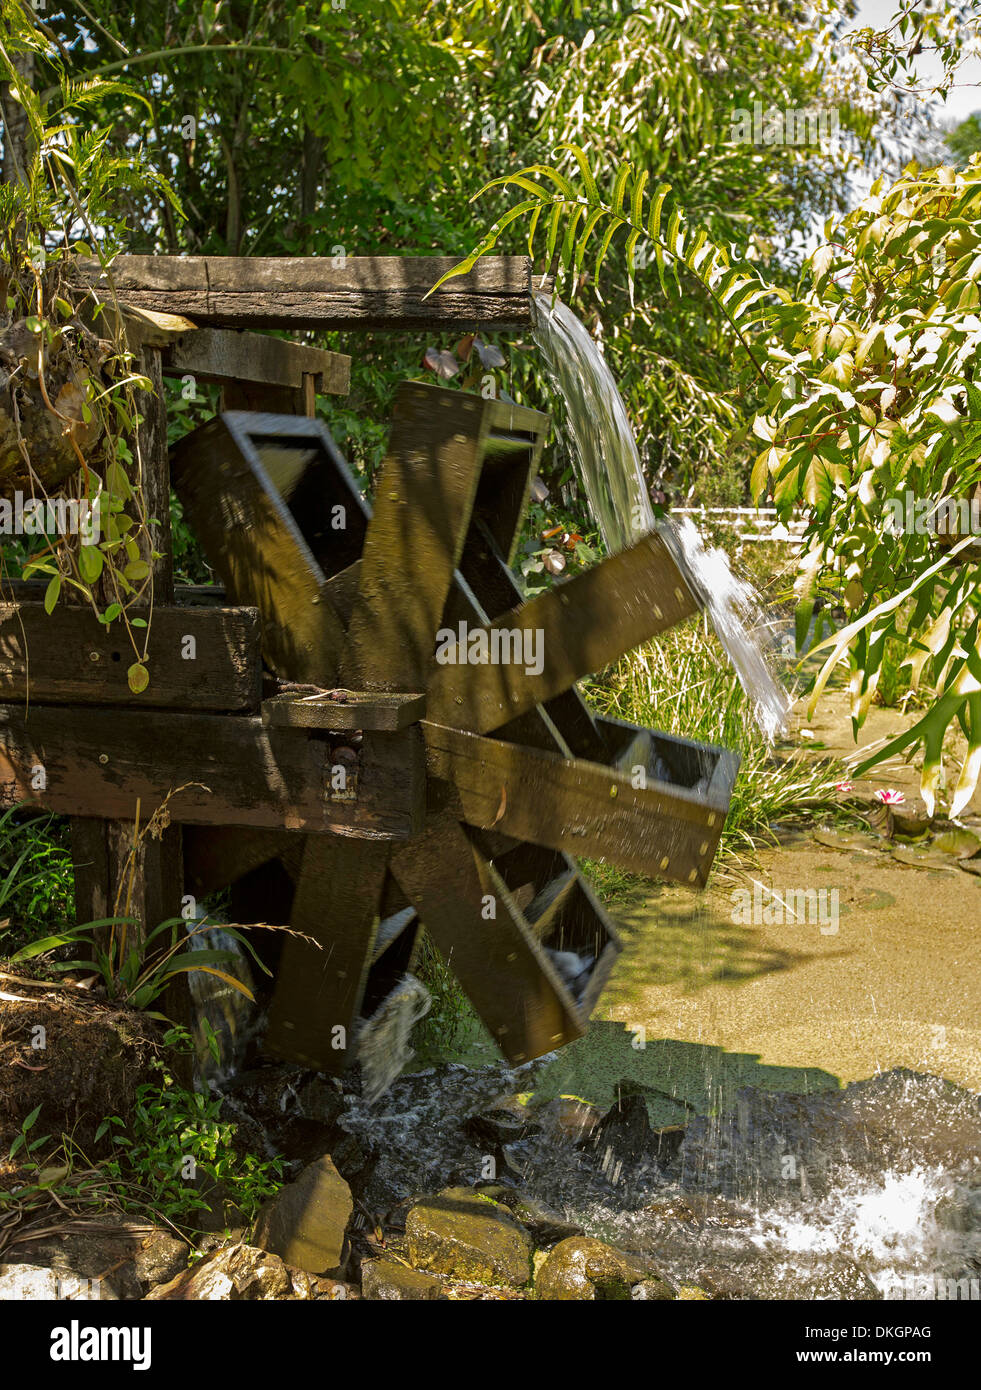 Unique water feature - water pouring over large rotating wooden waterwheel in garden pond surrounded by dense vegetation Stock Photo